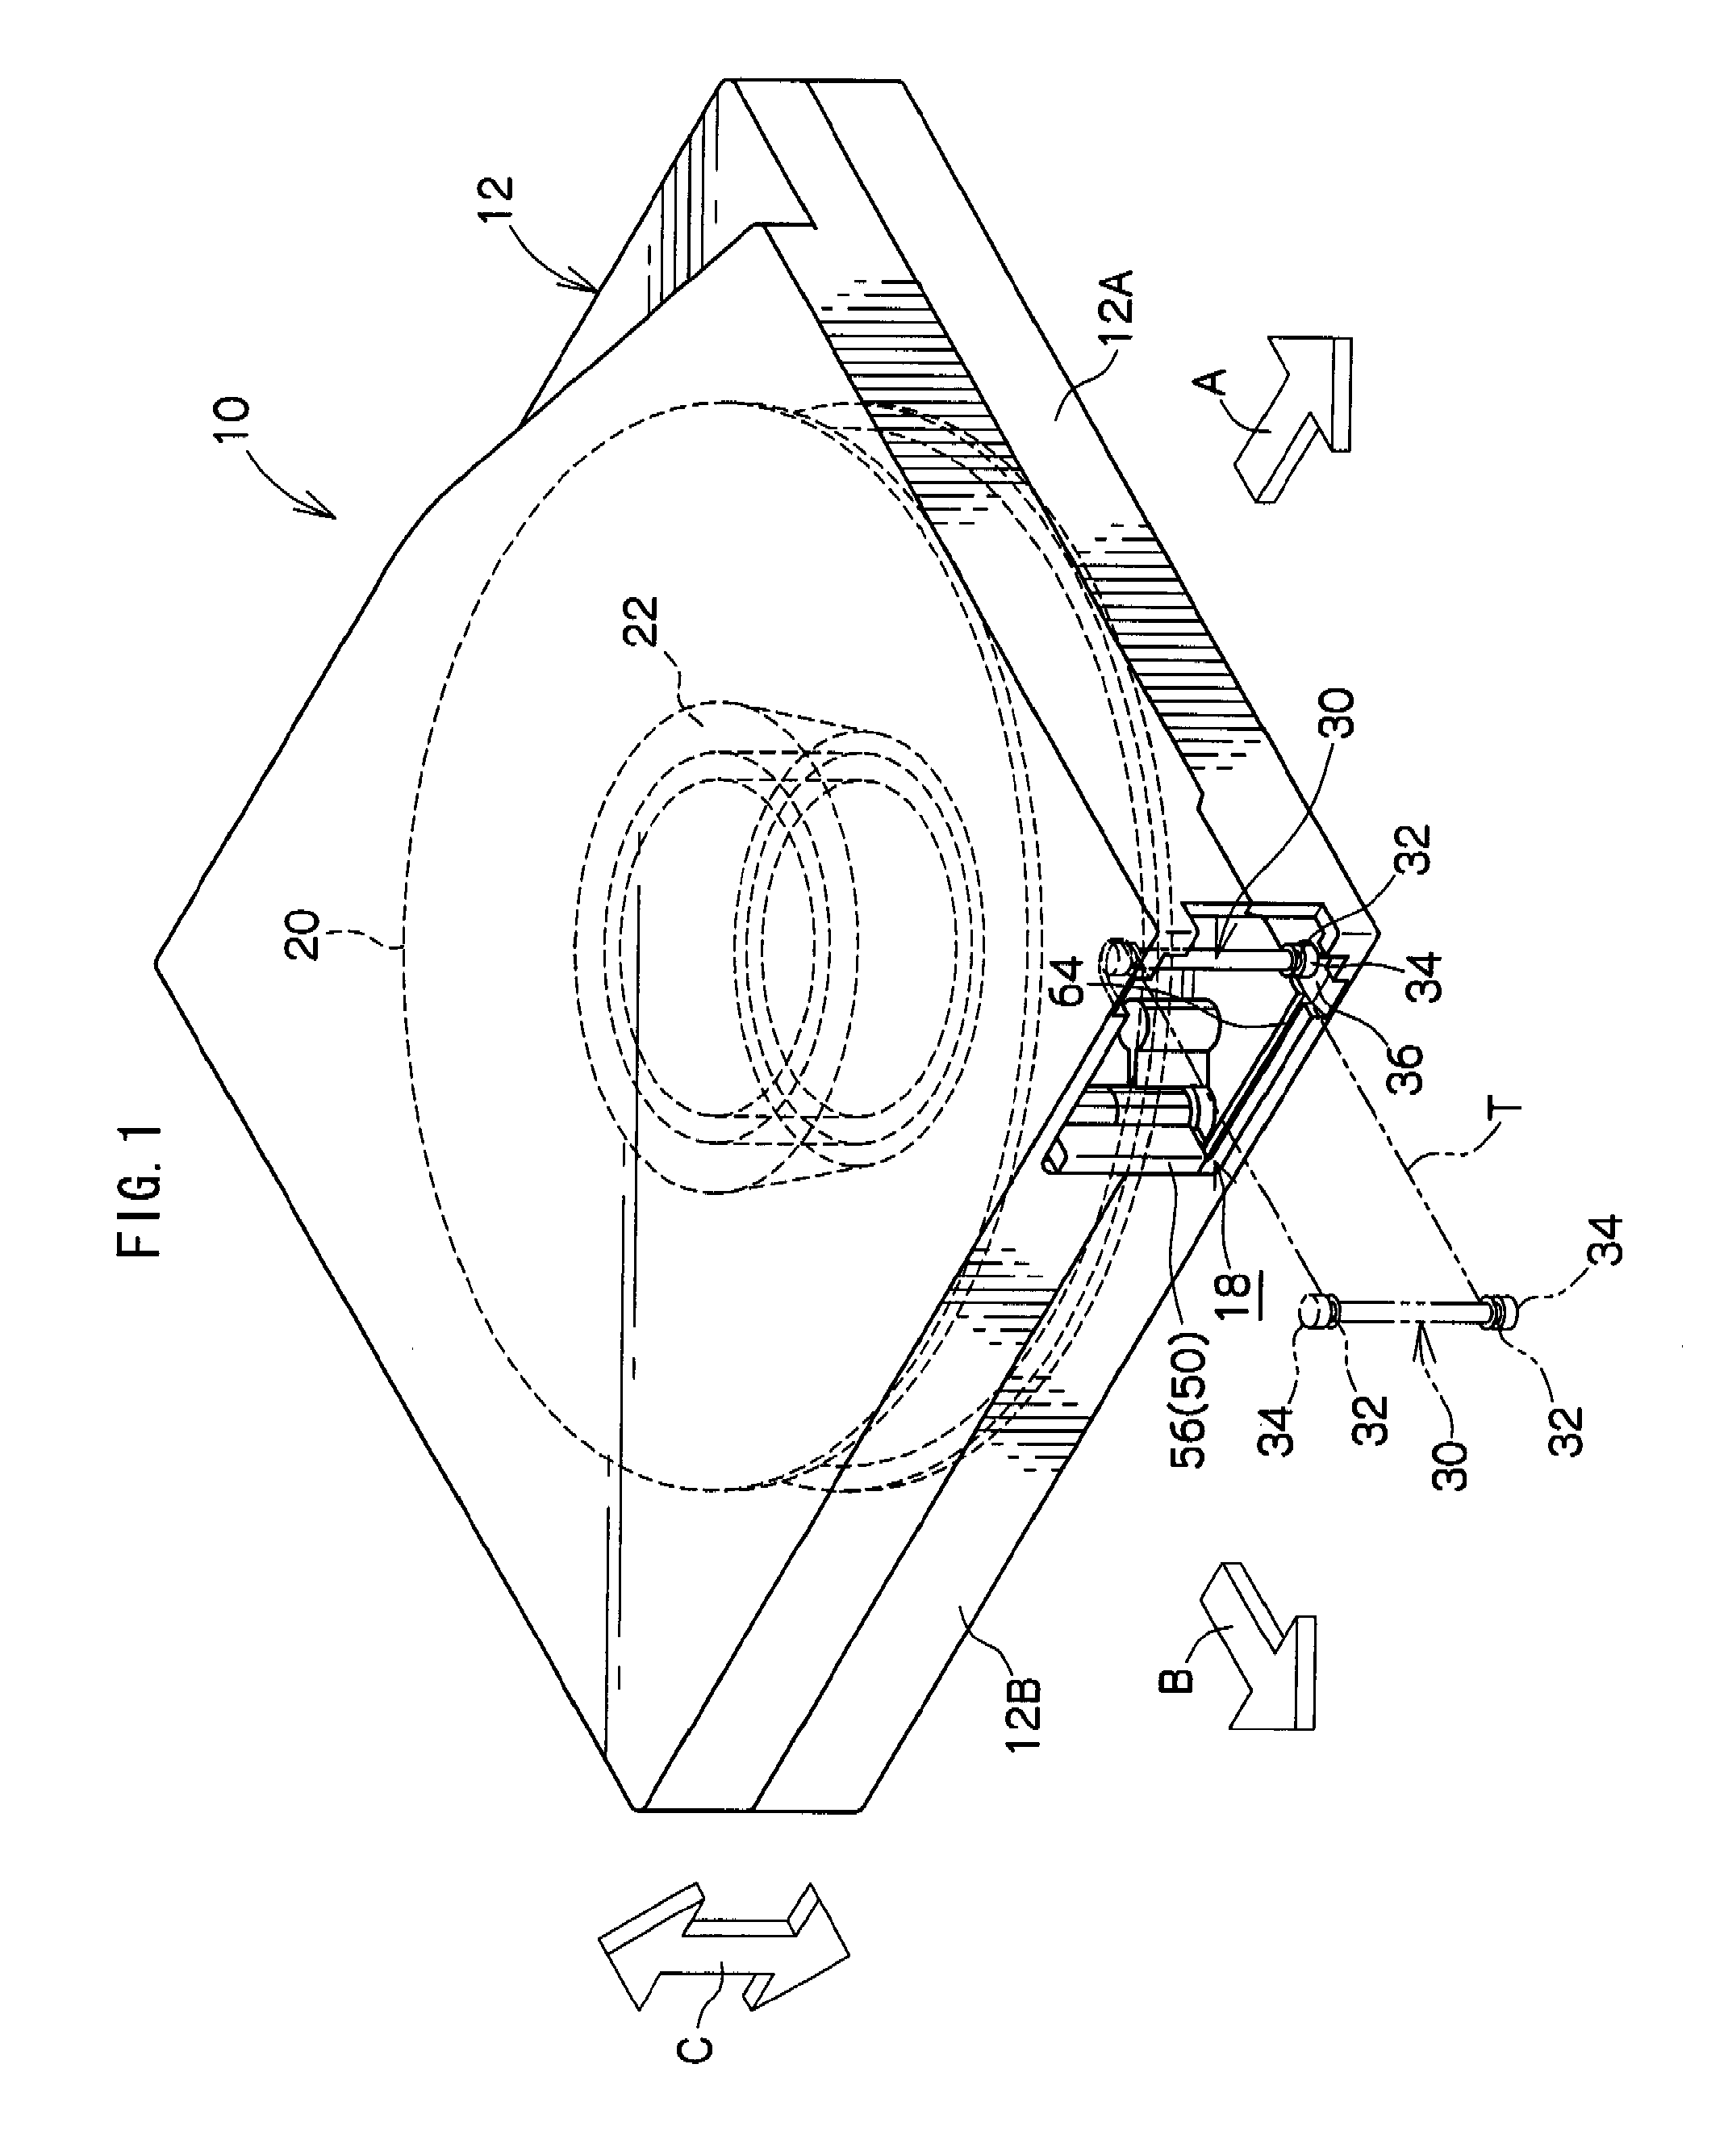 Tape reel, recording tape cartridge, take-up reel, drawing-out member, and drive device